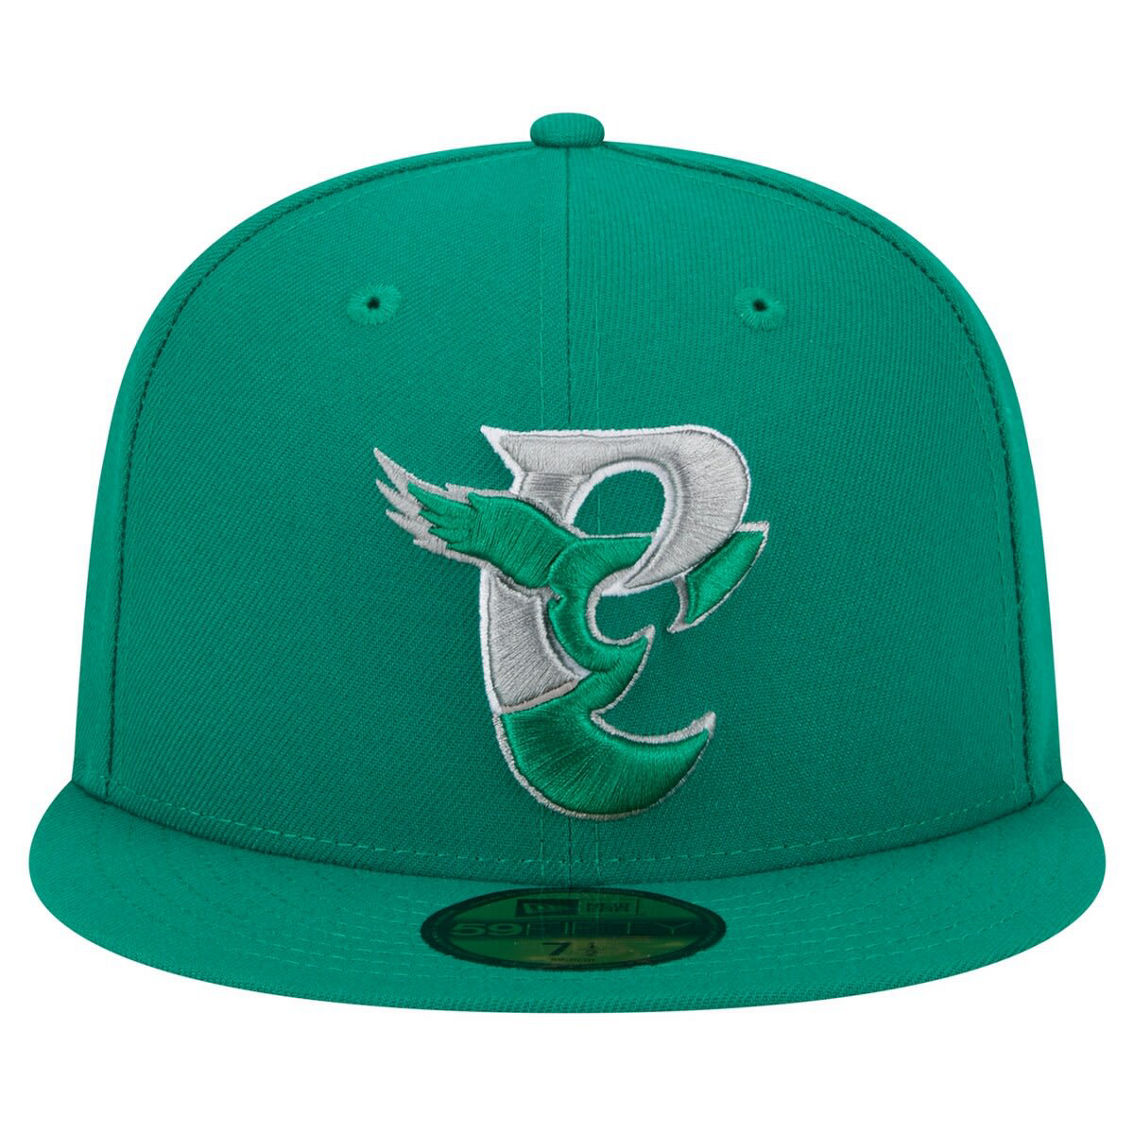 New Era Men's Kelly Green Philadelphia Eagles City Originals 59FIFTY Fitted Hat - Image 3 of 4